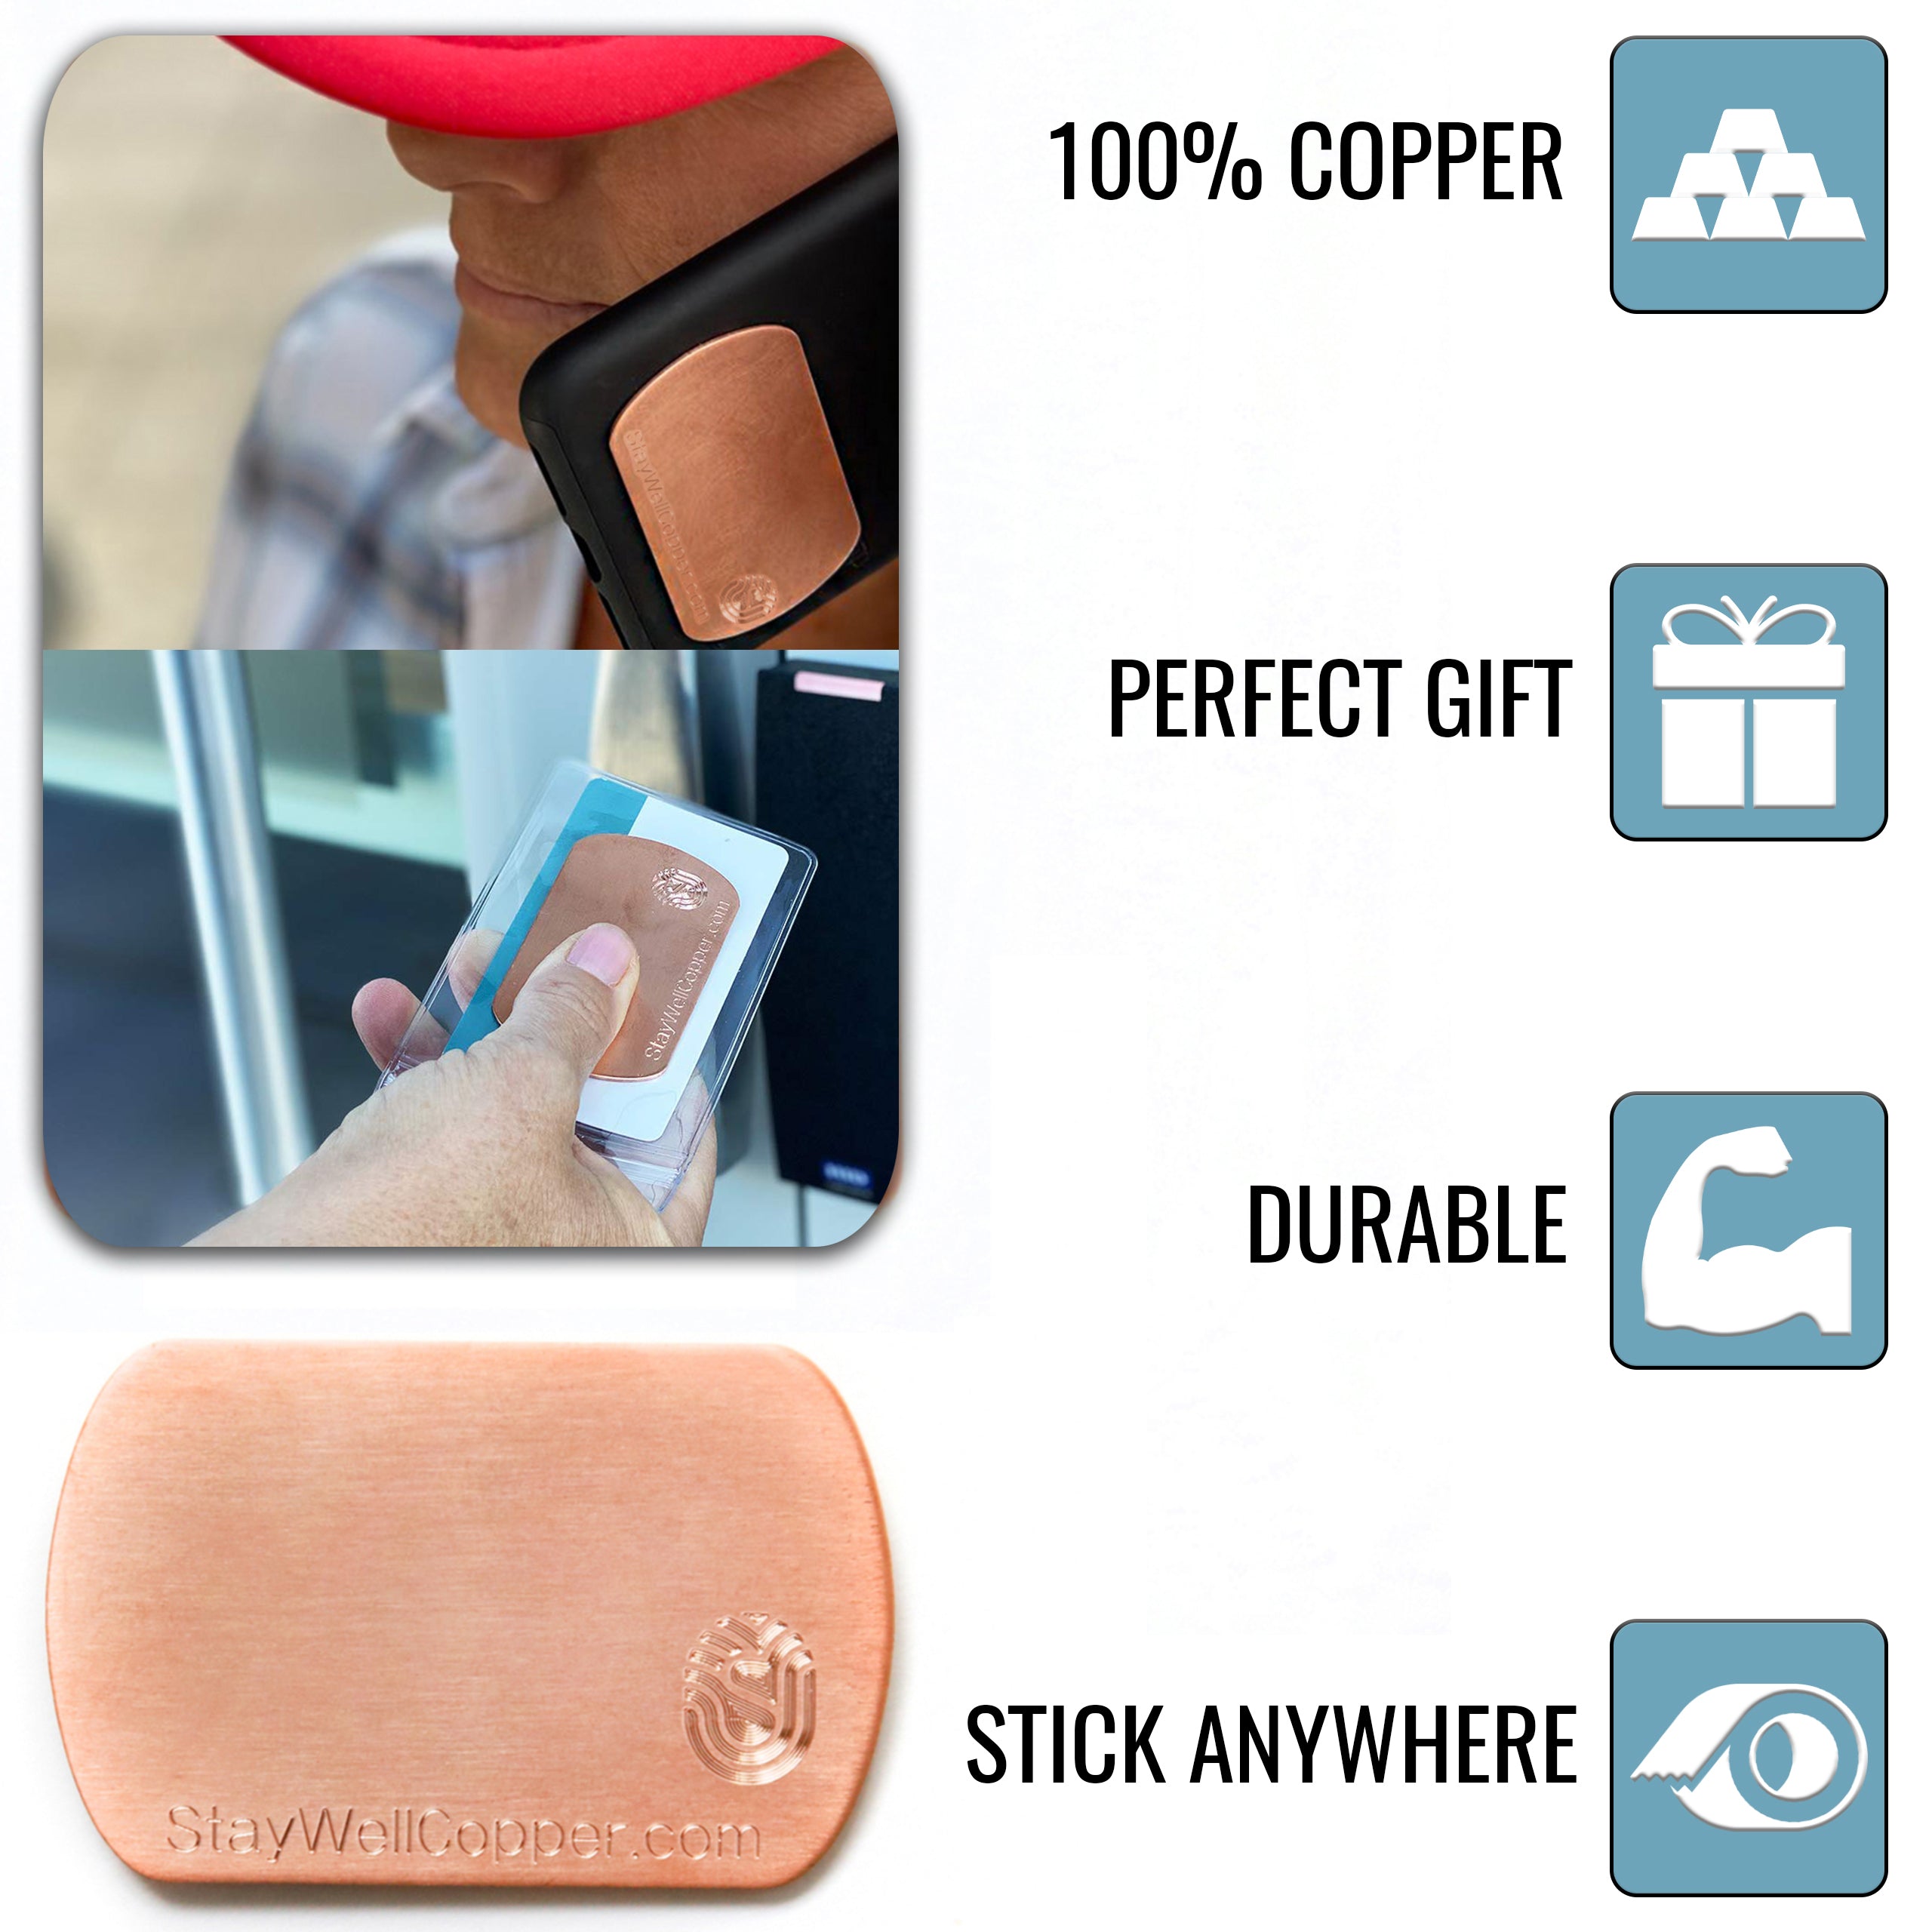 100% Copper  Perfect Gift  Durable  Stick Anywhere  2" x 1.5" Adhesive Phone Patch made in USA from natural antimicrobial copper attaches to germy devices we touch most. All Natural Hand Sanitizers, Chemical Free, Lasts Forever. Recyclable. Kills 99.9% of Harmful Bacteria. EPA registered. 